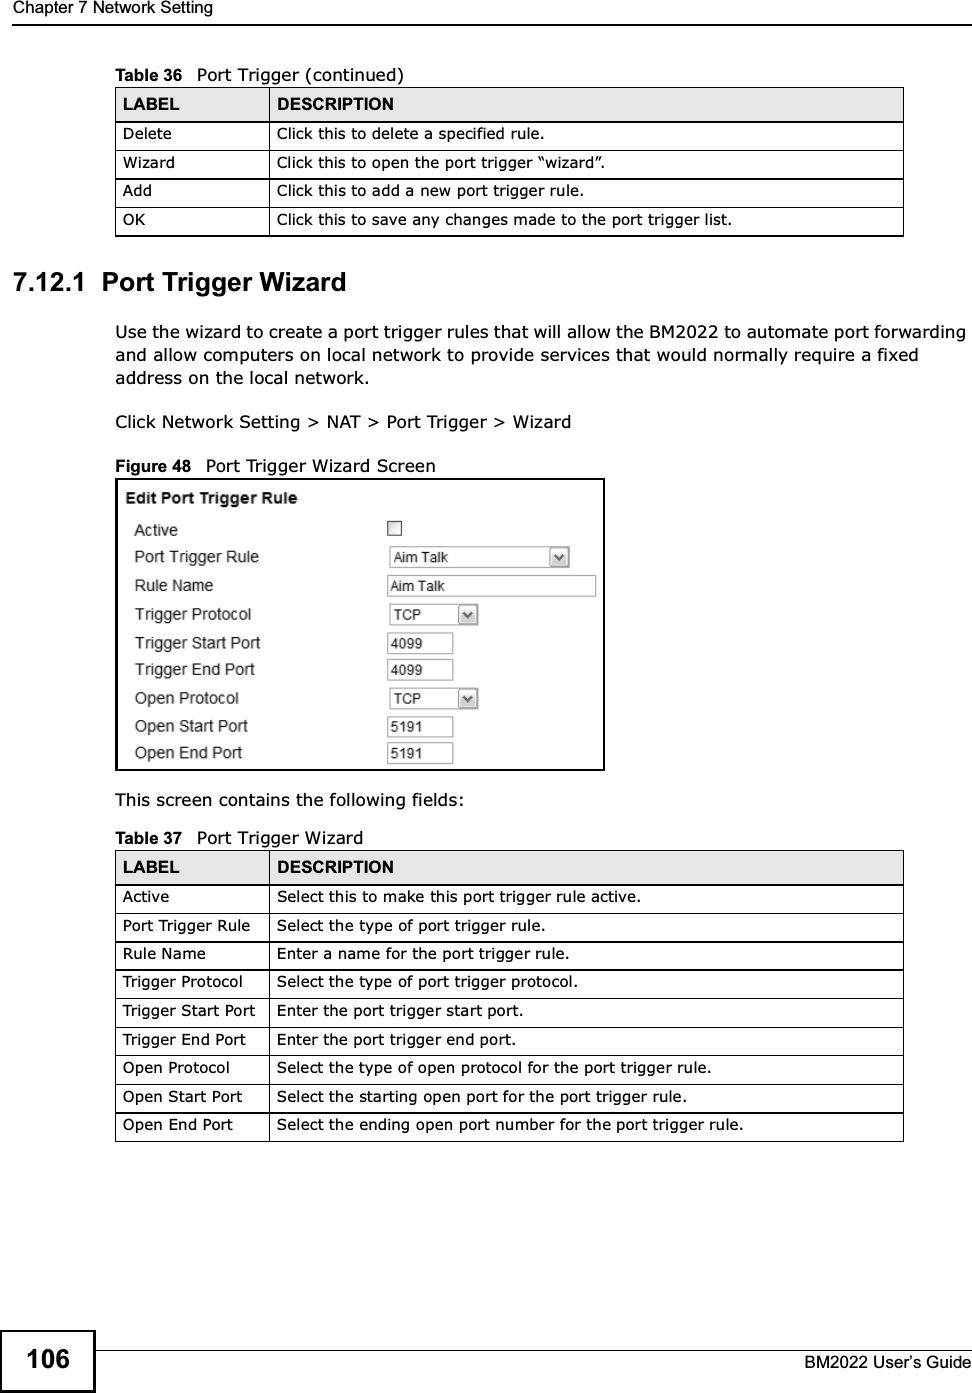 Chapter 7 Network SettingBM2022 Users Guide1067.12.1  Port Trigger WizardUse the wizard to create a port trigger rules that will allow the BM2022 to automate port forwarding and allow computers on local network to provide services that would normally require a fixed address on the local network.Click Network Setting &gt; NAT &gt; Port Trigger &gt; WizardFigure 48   Port Trigger Wizard ScreenThis screen contains the following fields:Delete Click this to delete a specified rule.Wizard Click this to open the port trigger wizard.Add Click this to add a new port trigger rule.OK Click this to save any changes made to the port trigger list.Table 36   Port Trigger (continued)LABEL DESCRIPTIONTable 37   Port Trigger WizardLABEL DESCRIPTIONActive Select this to make this port trigger rule active.Port Trigger Rule Select the type of port trigger rule.Rule Name Enter a name for the port trigger rule.Trigger Protocol Select the type of port trigger protocol.Trigger Start Port Enter the port trigger start port.Trigger End Port Enter the port trigger end port.Open Protocol Select the type of open protocol for the port trigger rule.Open Start Port Select the starting open port for the port trigger rule.Open End Port Select the ending open port number for the port trigger rule.